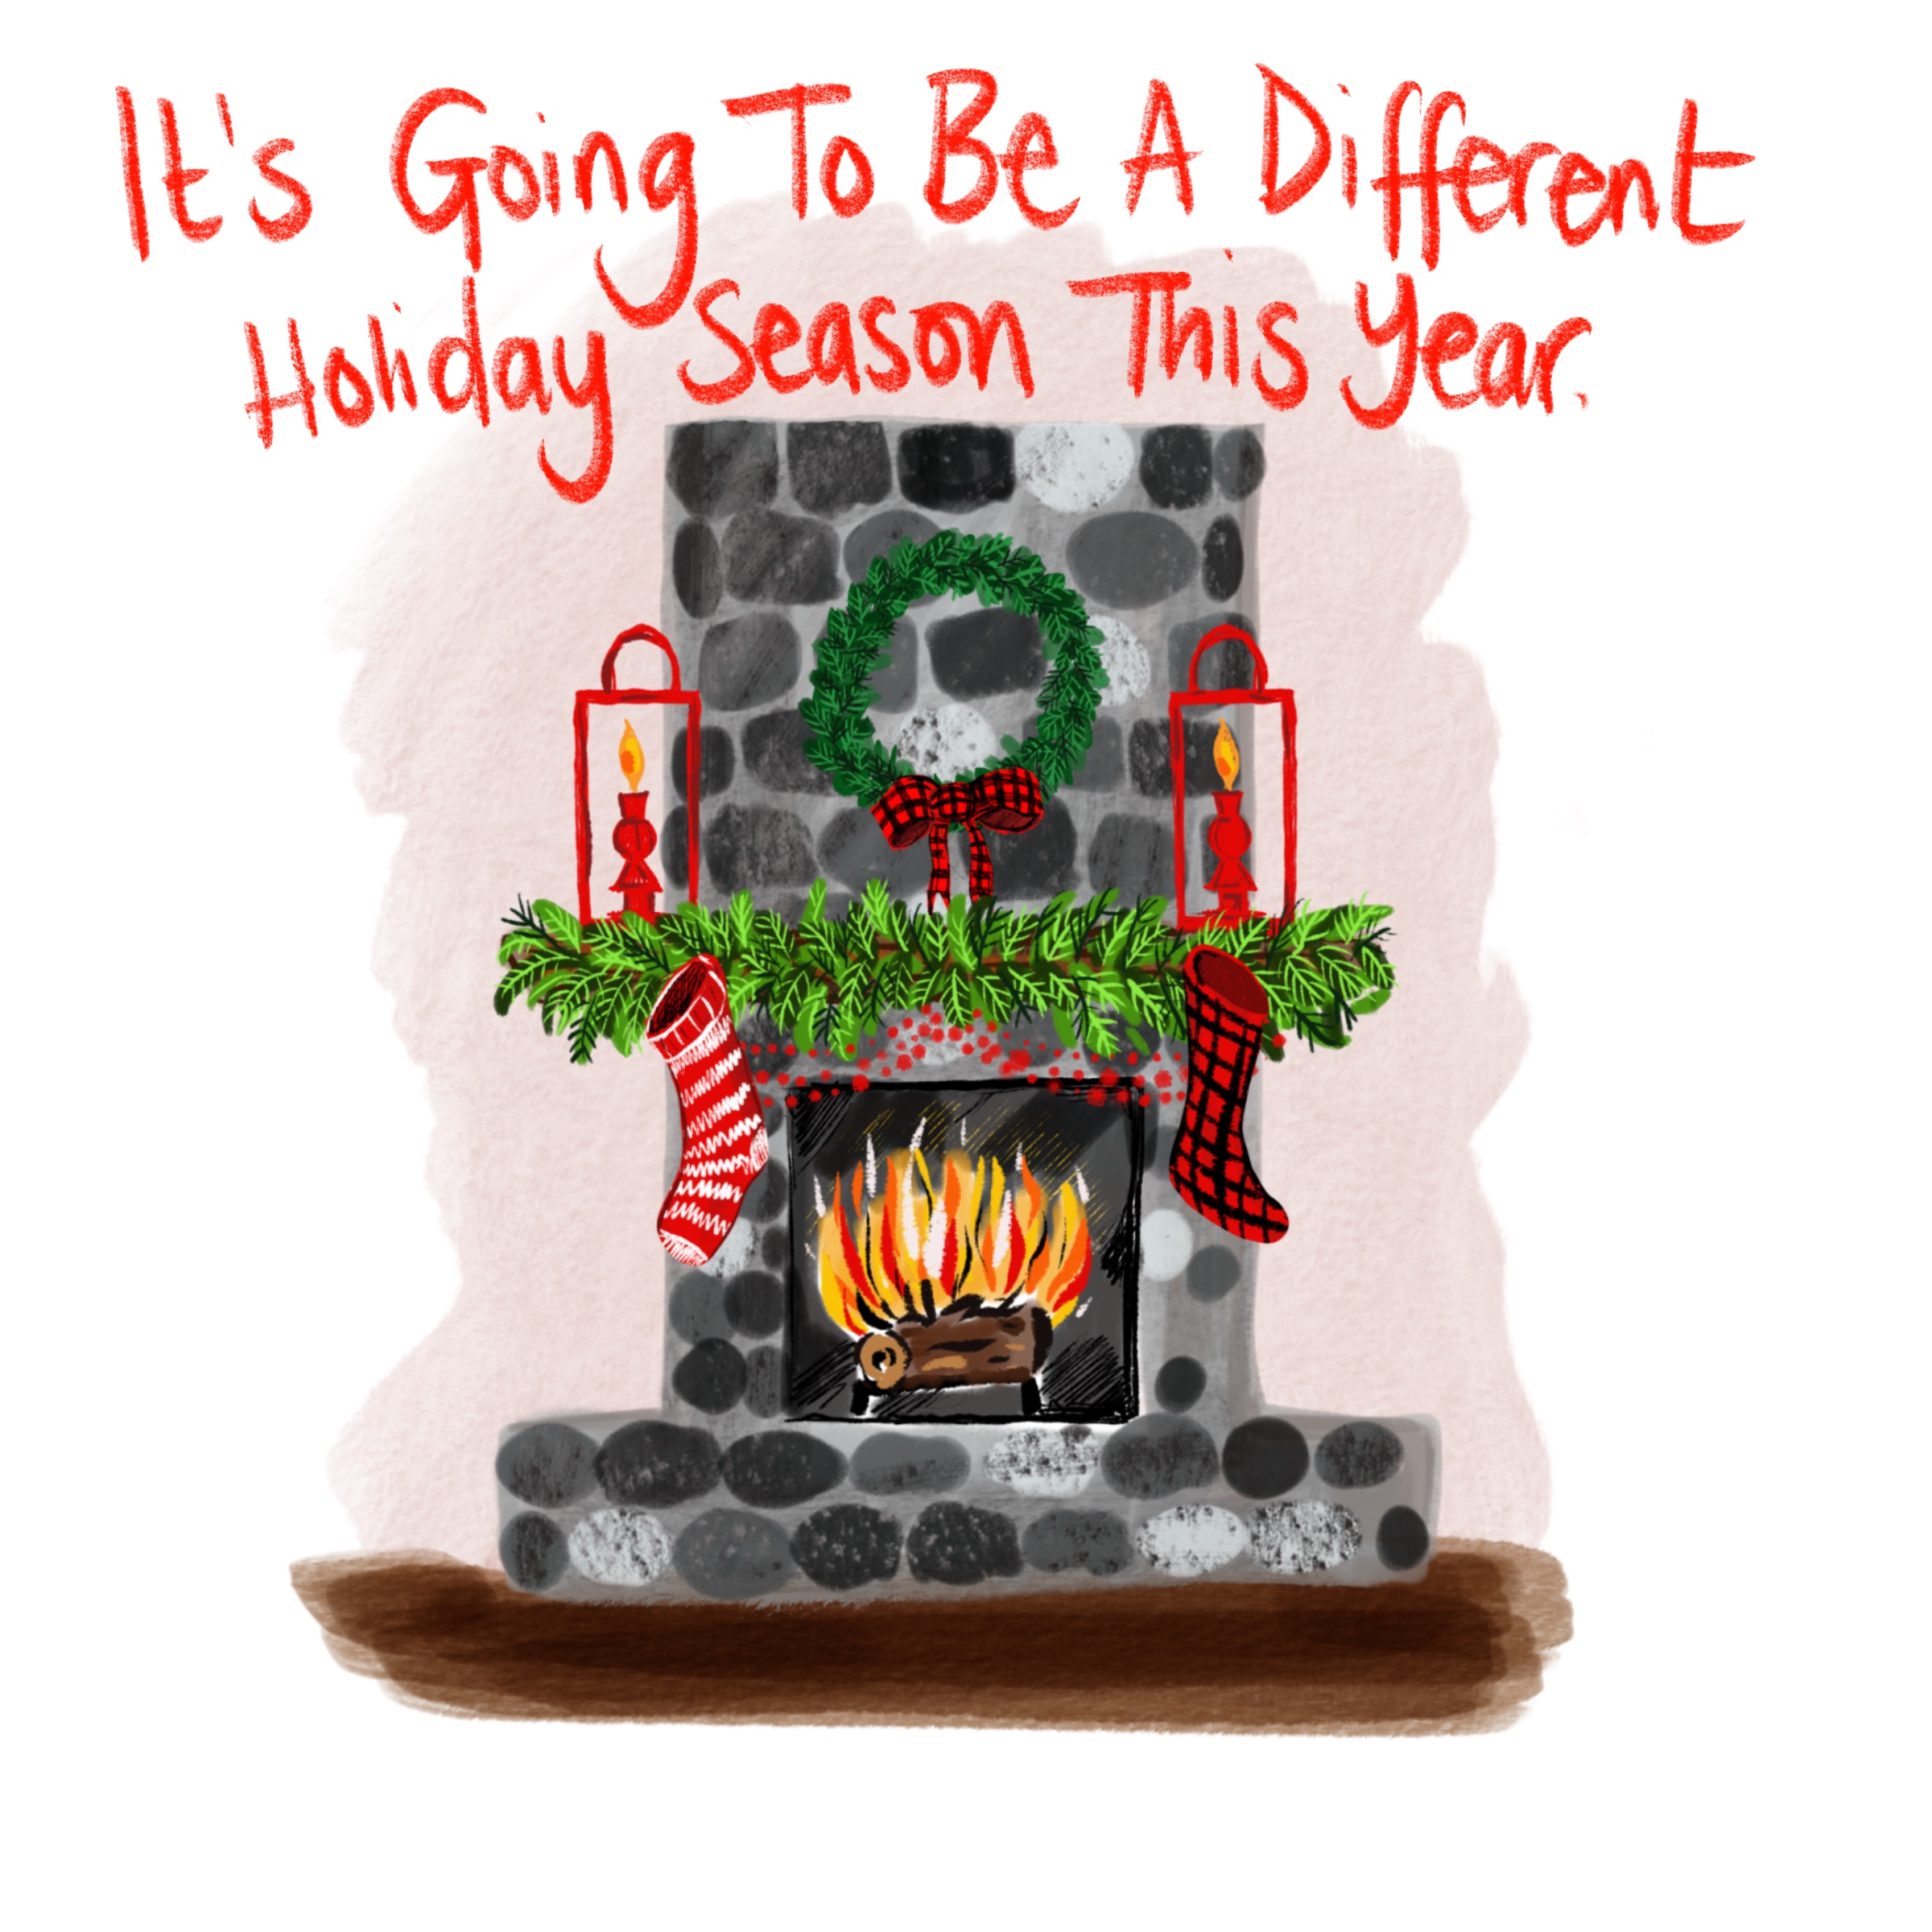 It’s Going To Be a Different Holiday Season - design for donation pledge appeal on Facebook